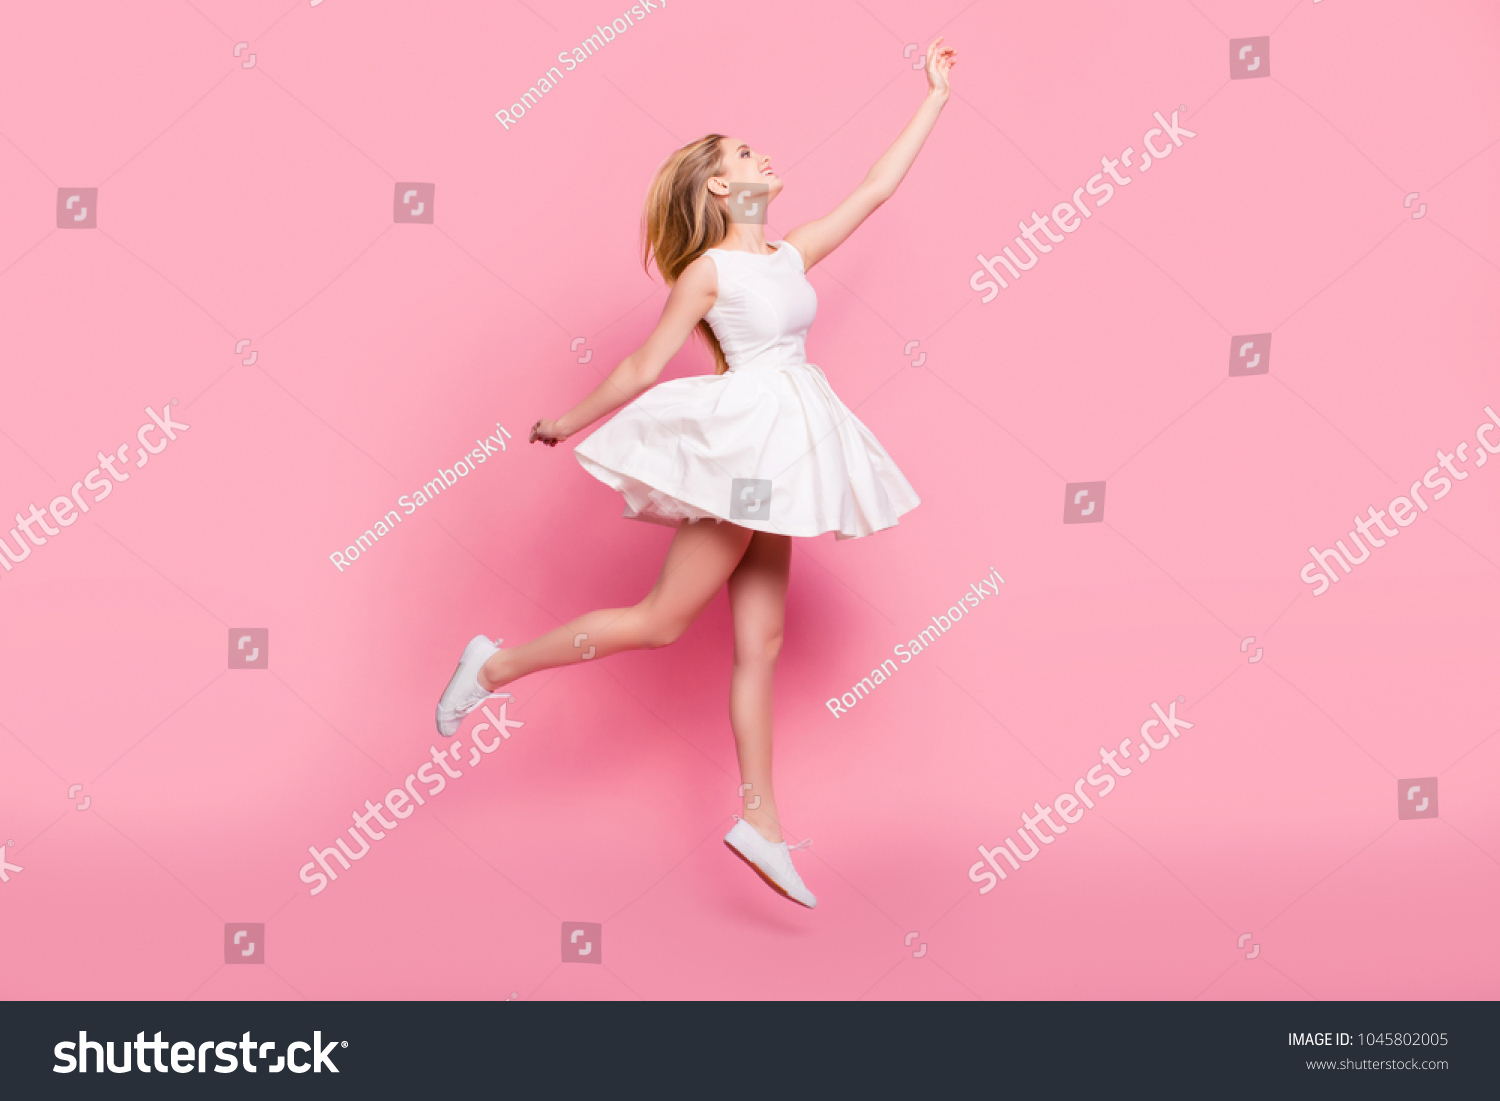 Full-size full-length side view portrait of beautiful attractive carefree tender gentle innocent stylish excited cheerful girl jumping up wants to touch sky isolated on background copy-space #1045802005